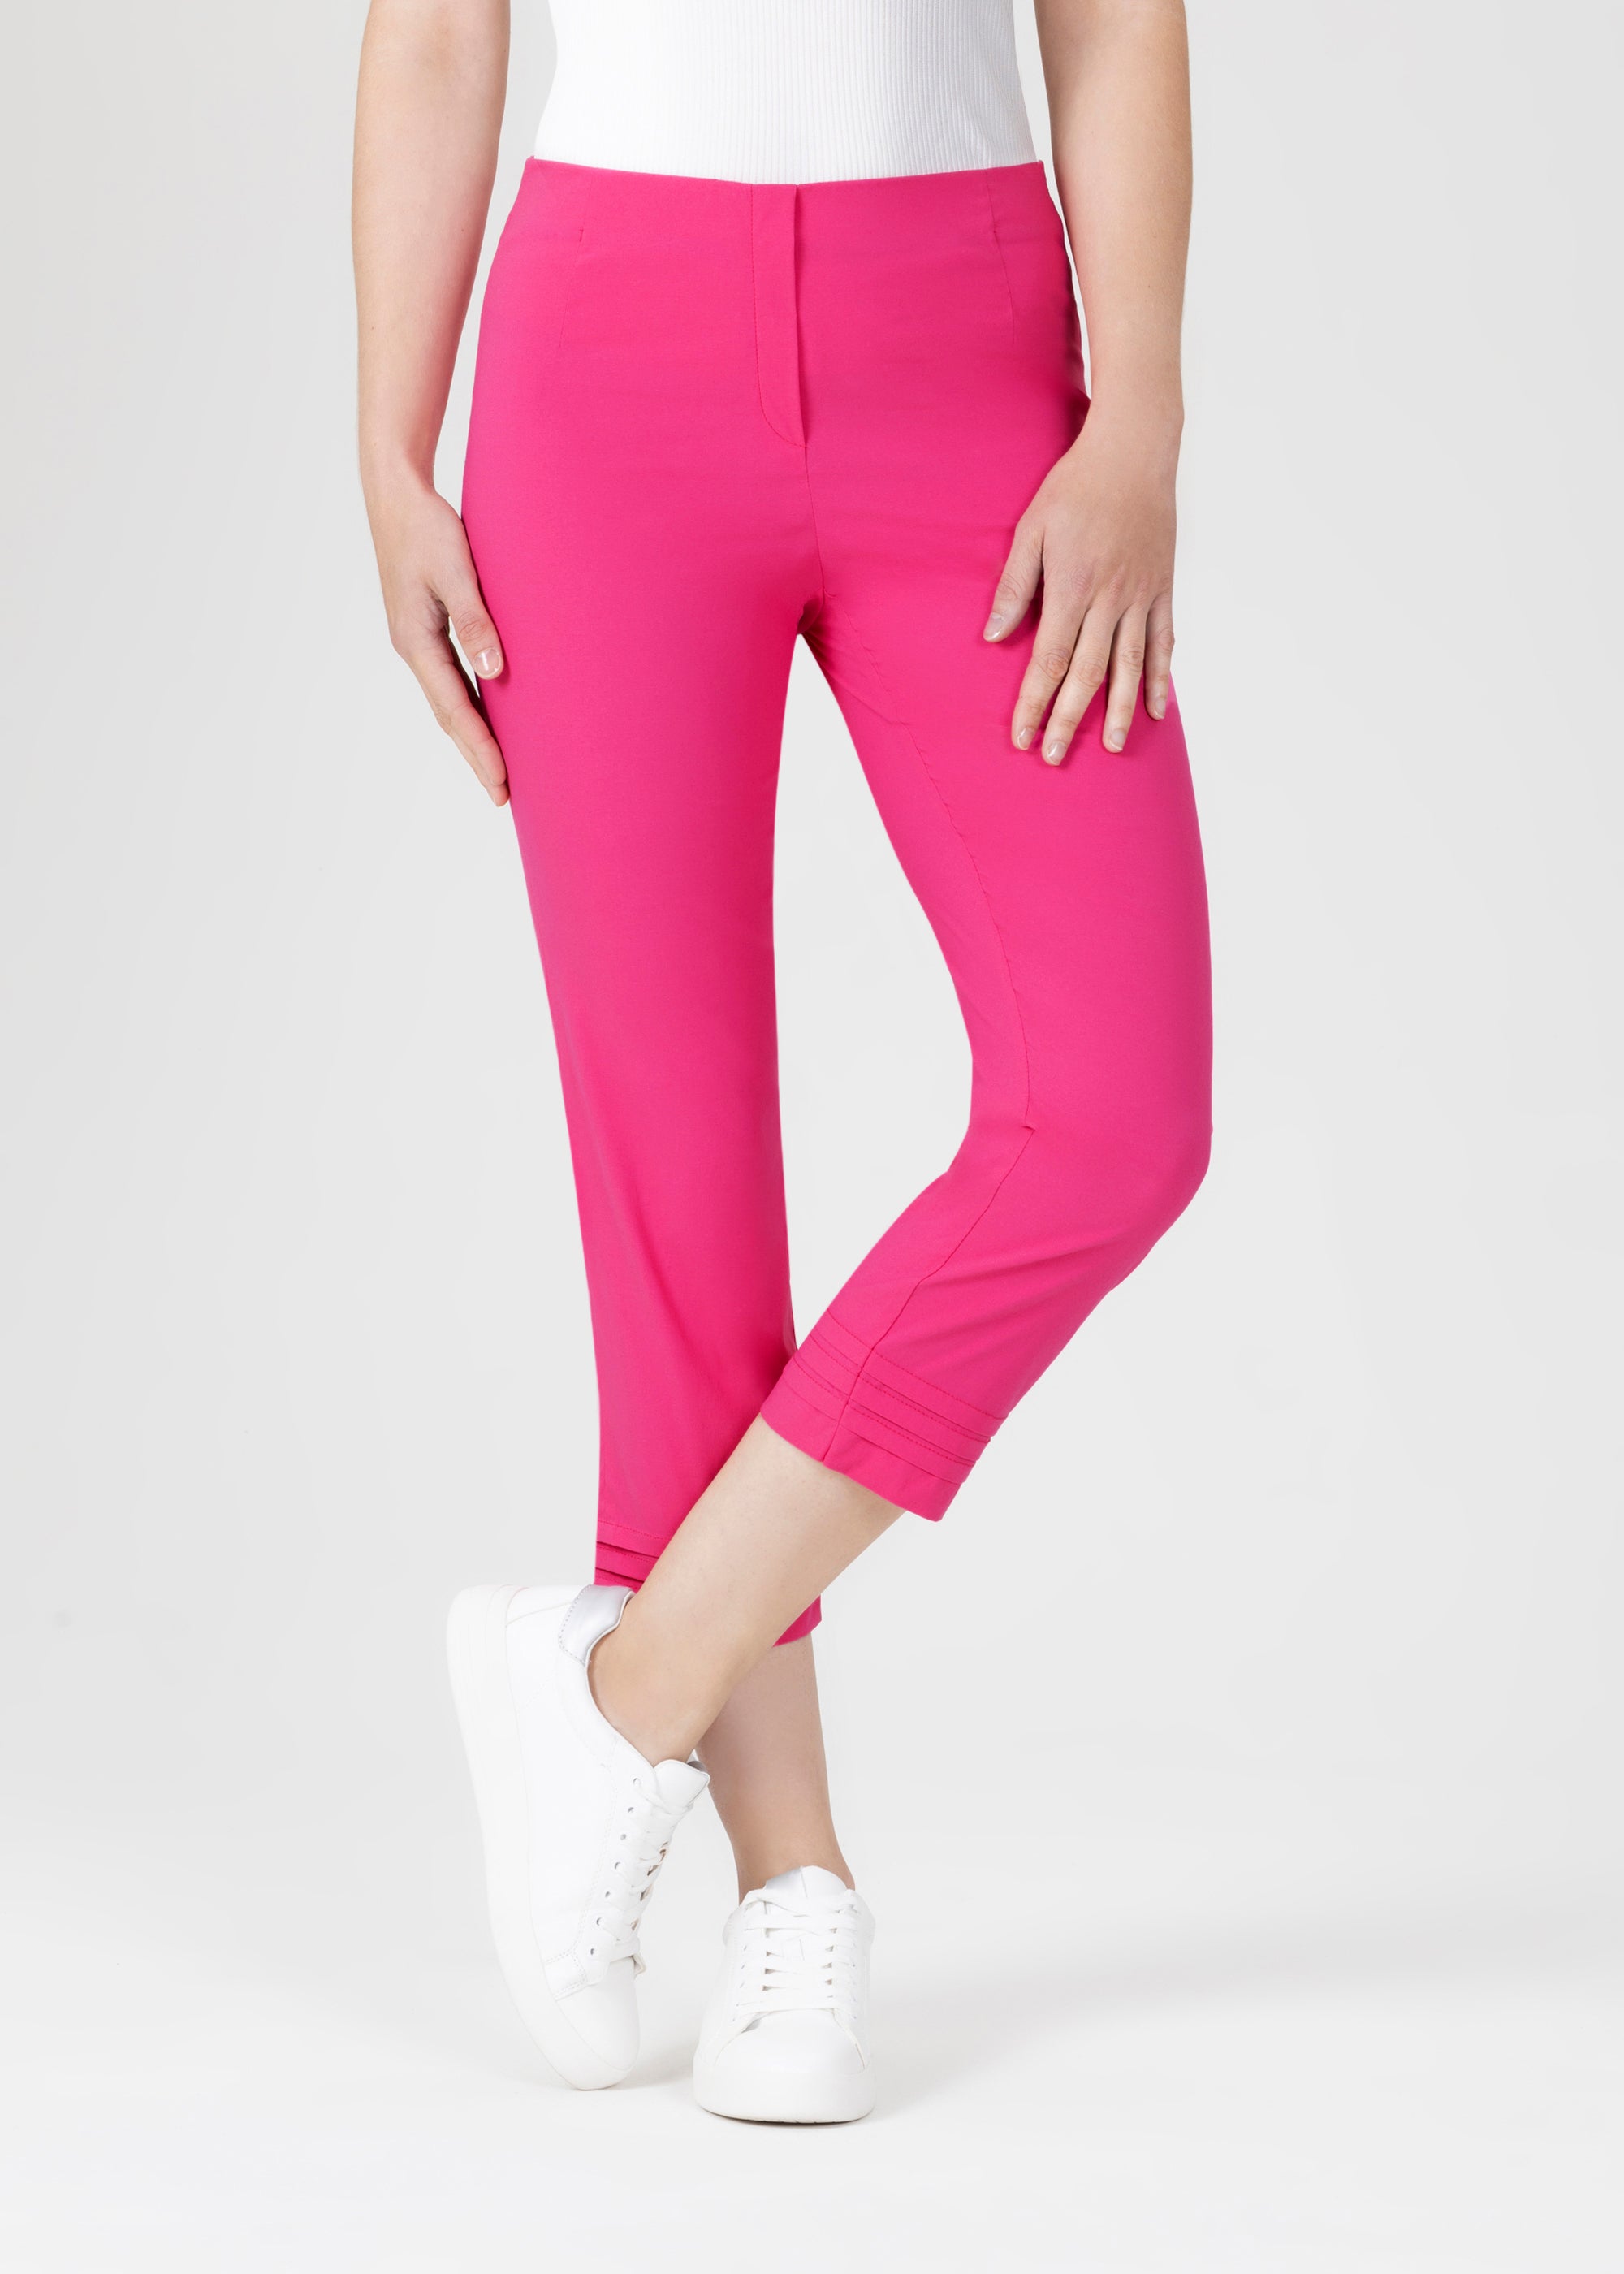 – Ina SHOP Bengaline in in ONLINE pink OFFICIAL | 6/8-Hose Stehmann-store.com Sommer